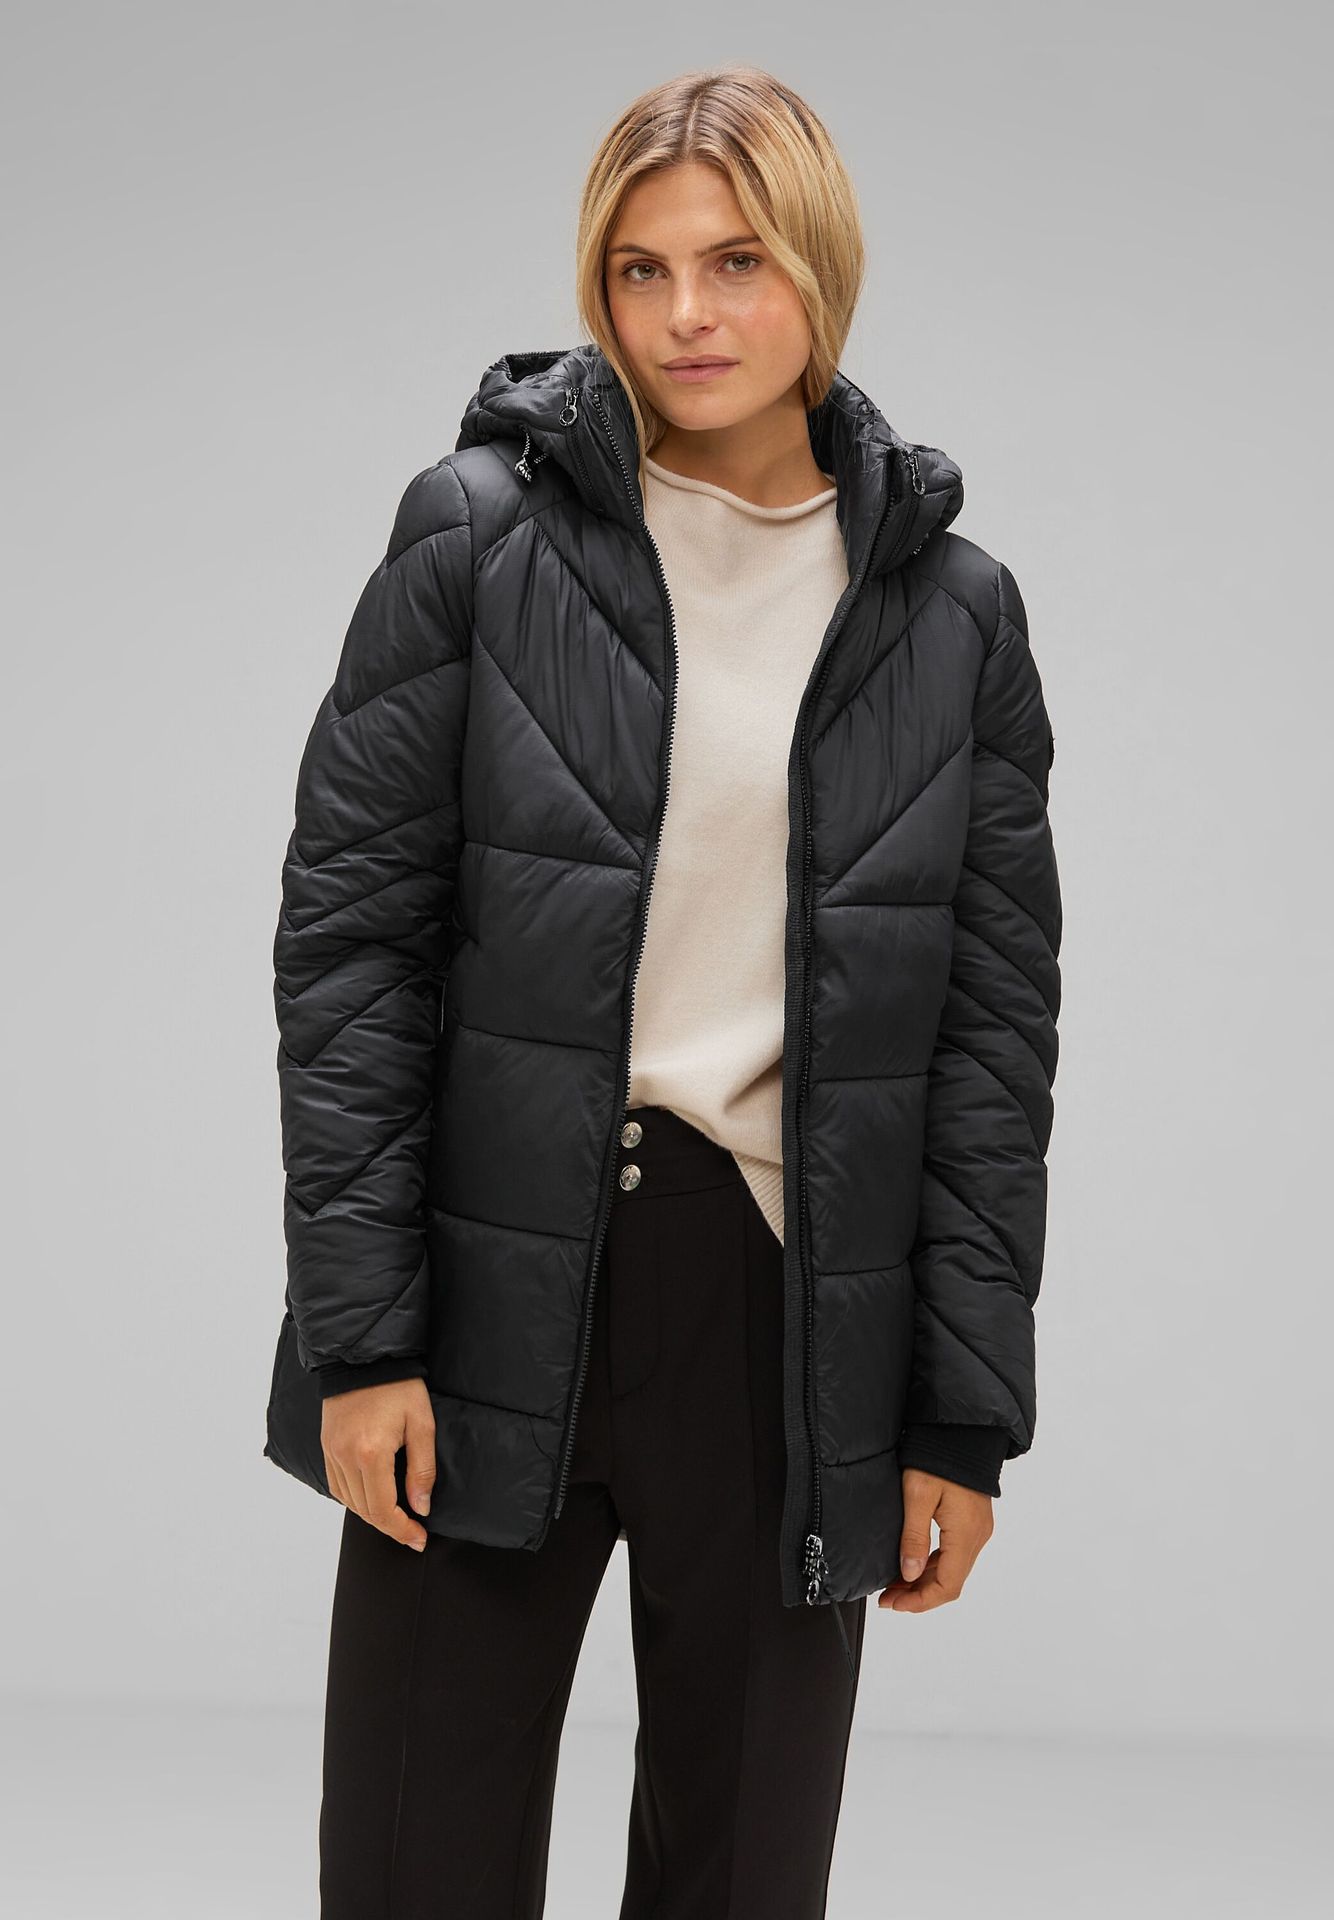 Padded mid lenght jacket